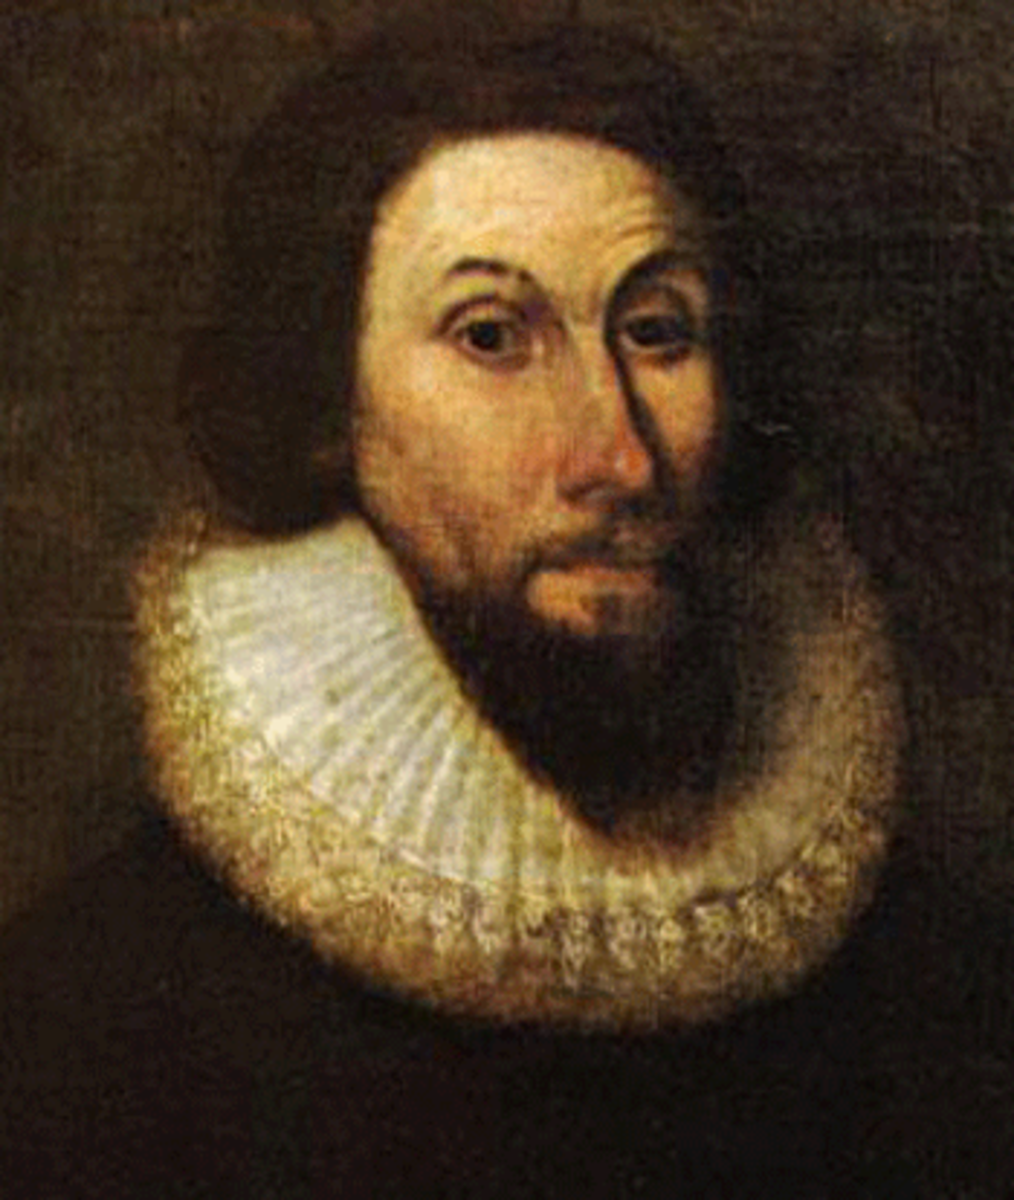 John Winthrop, first governor of the Massachusetts Bay Colony